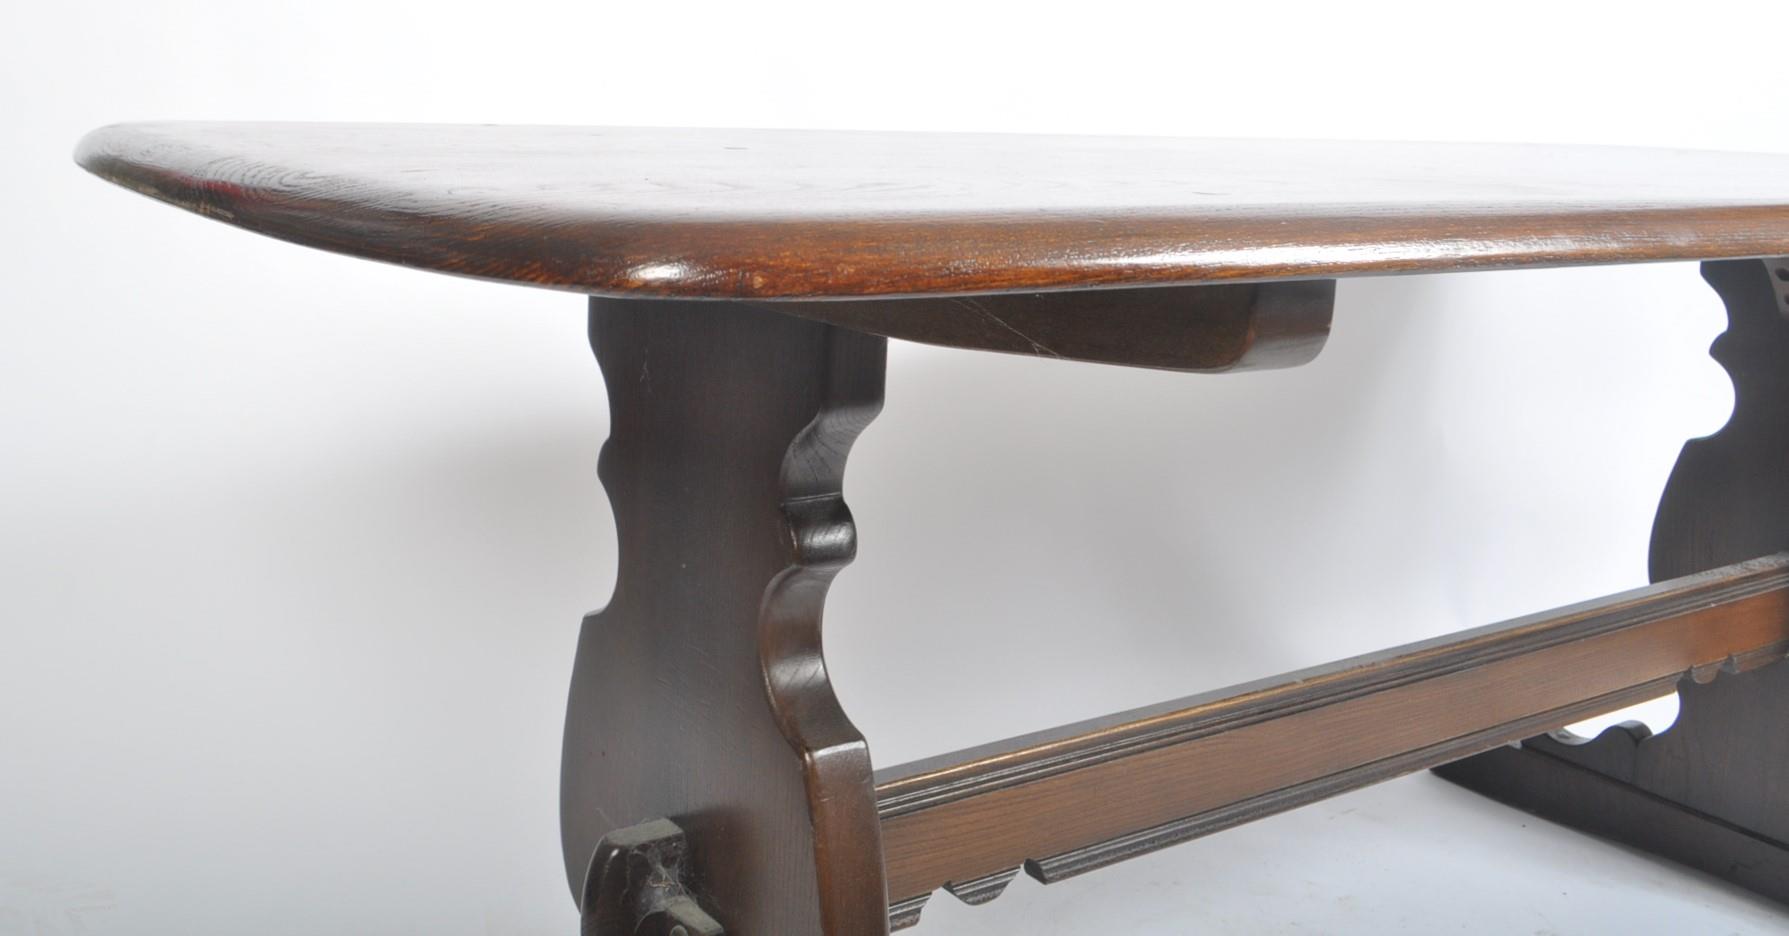 MID 20TH CENTURY BEECH & ELM ERCOL REFECTORY DINING TABLE - Image 4 of 4